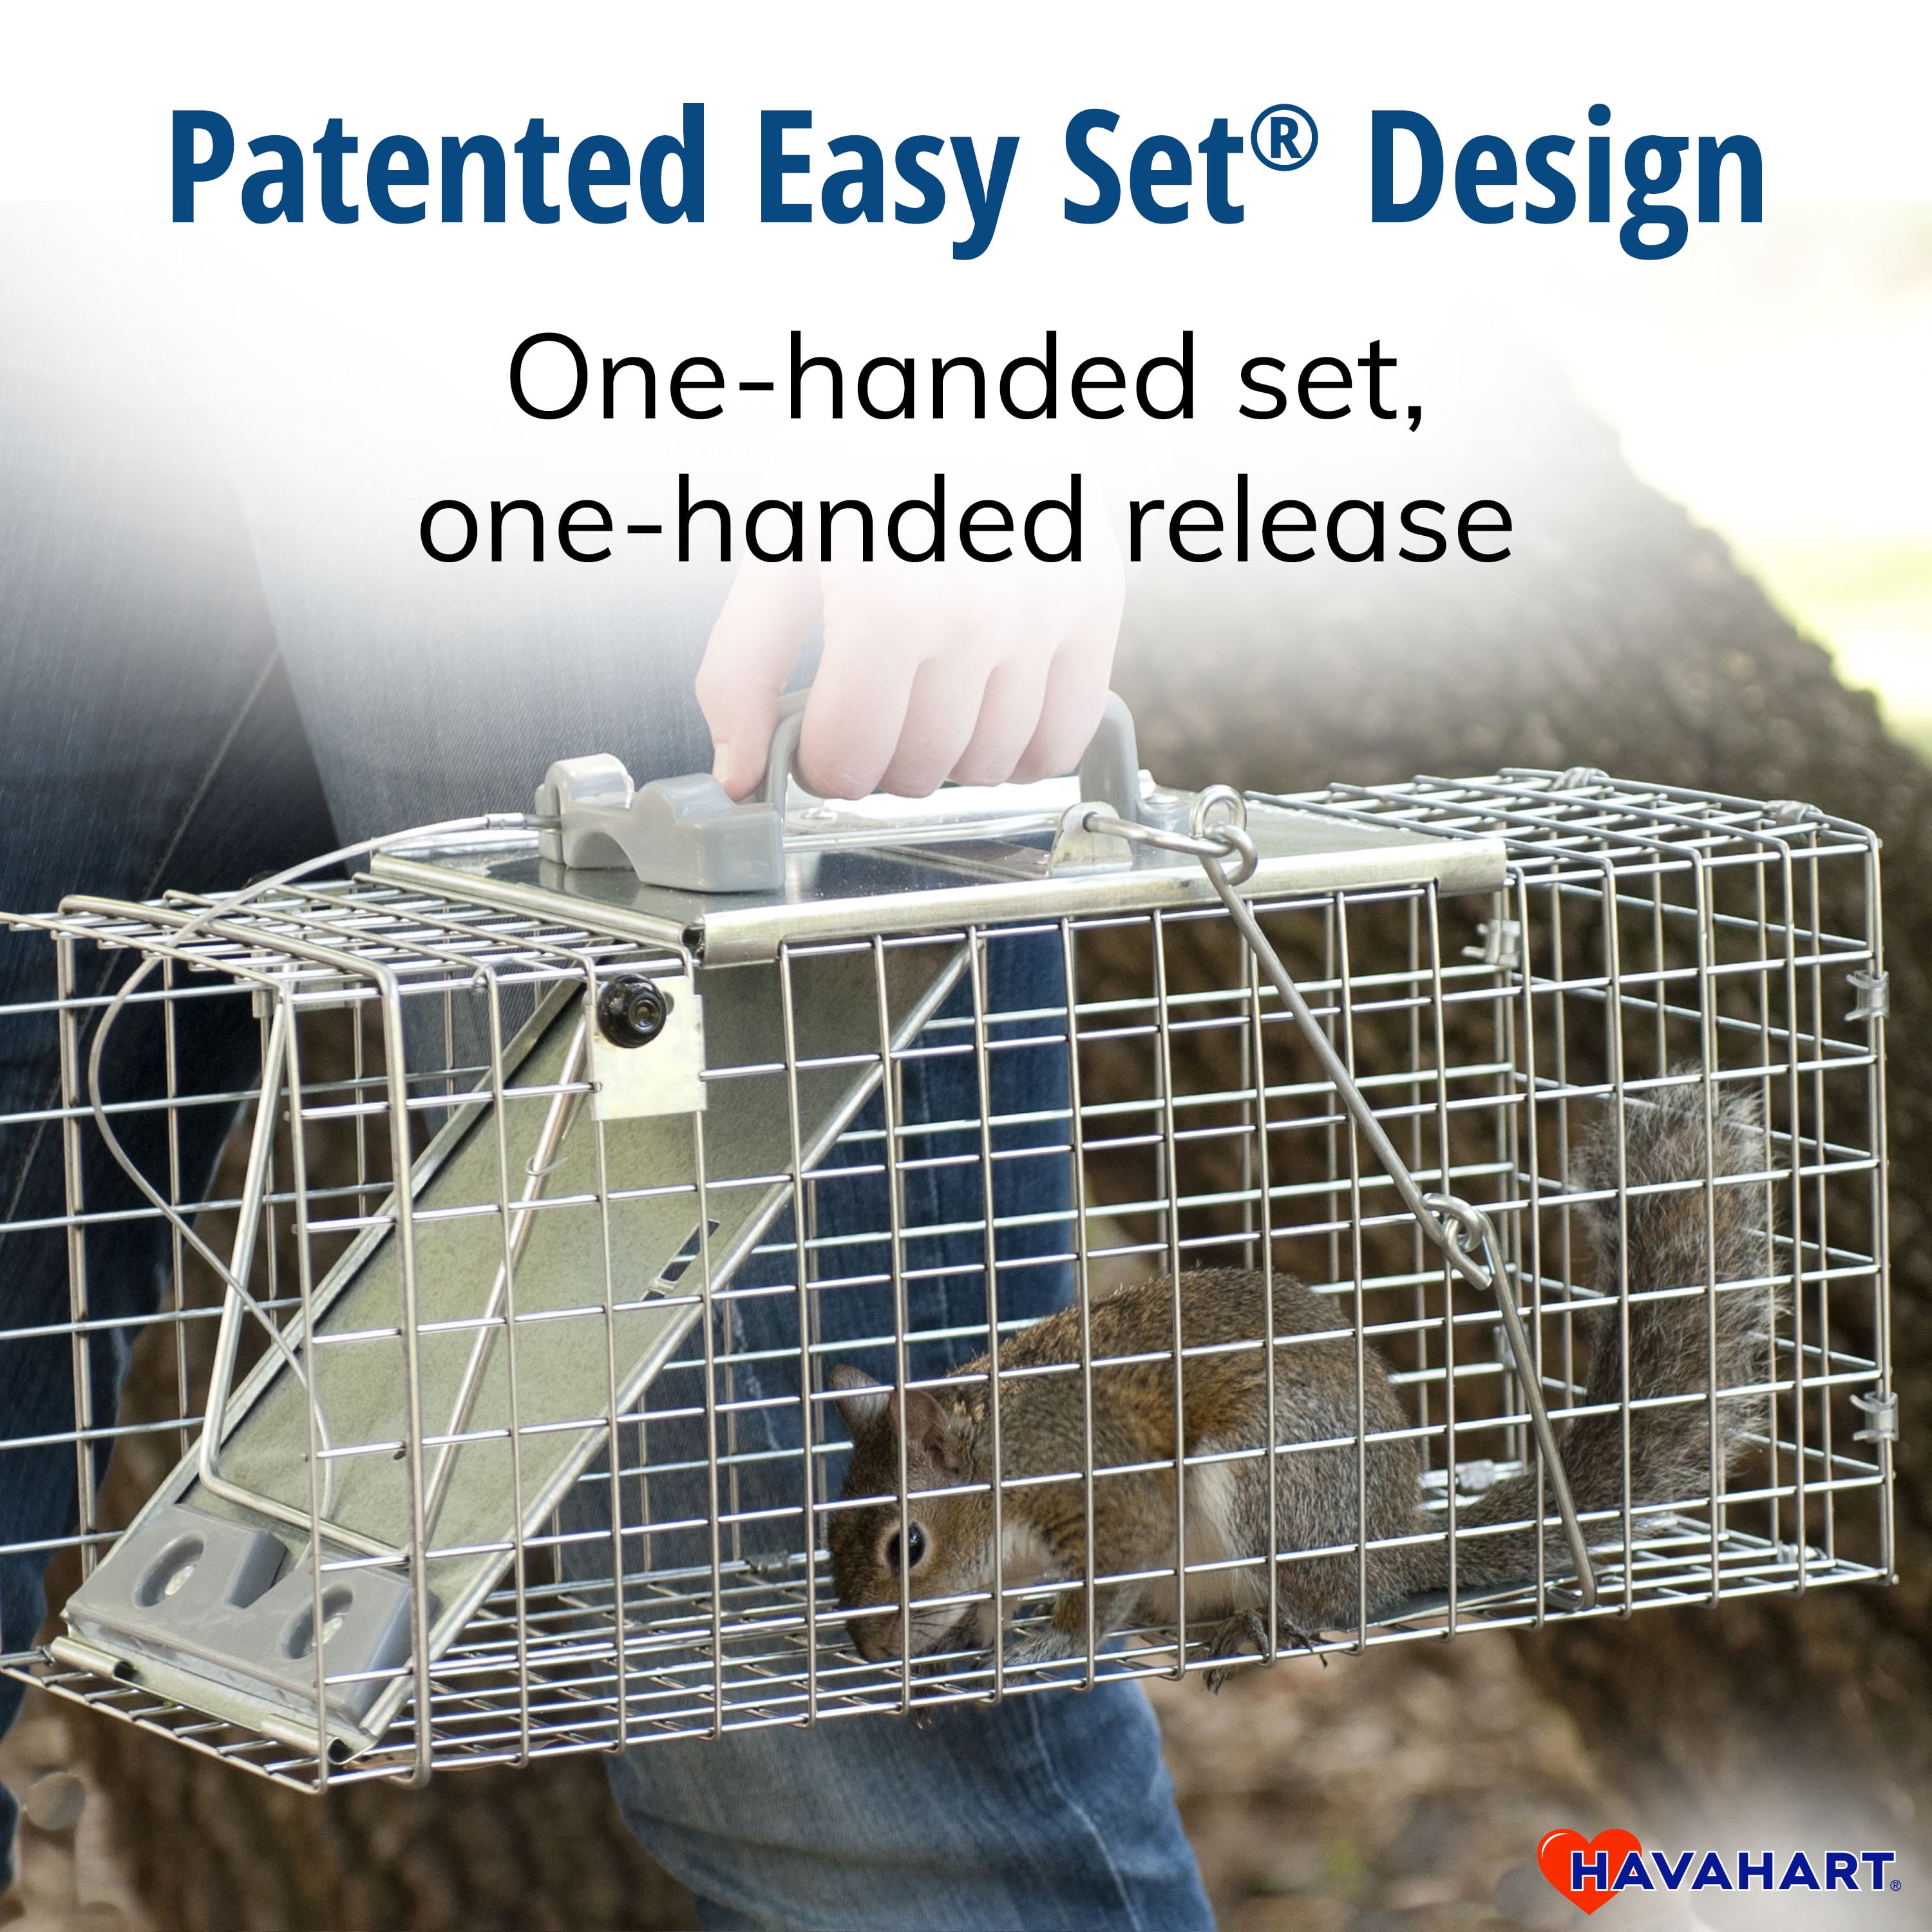 Havahart Easy Set Galvanized Steel 17 In. Live Squirrel Trap 1083, 1 -  Fry's Food Stores